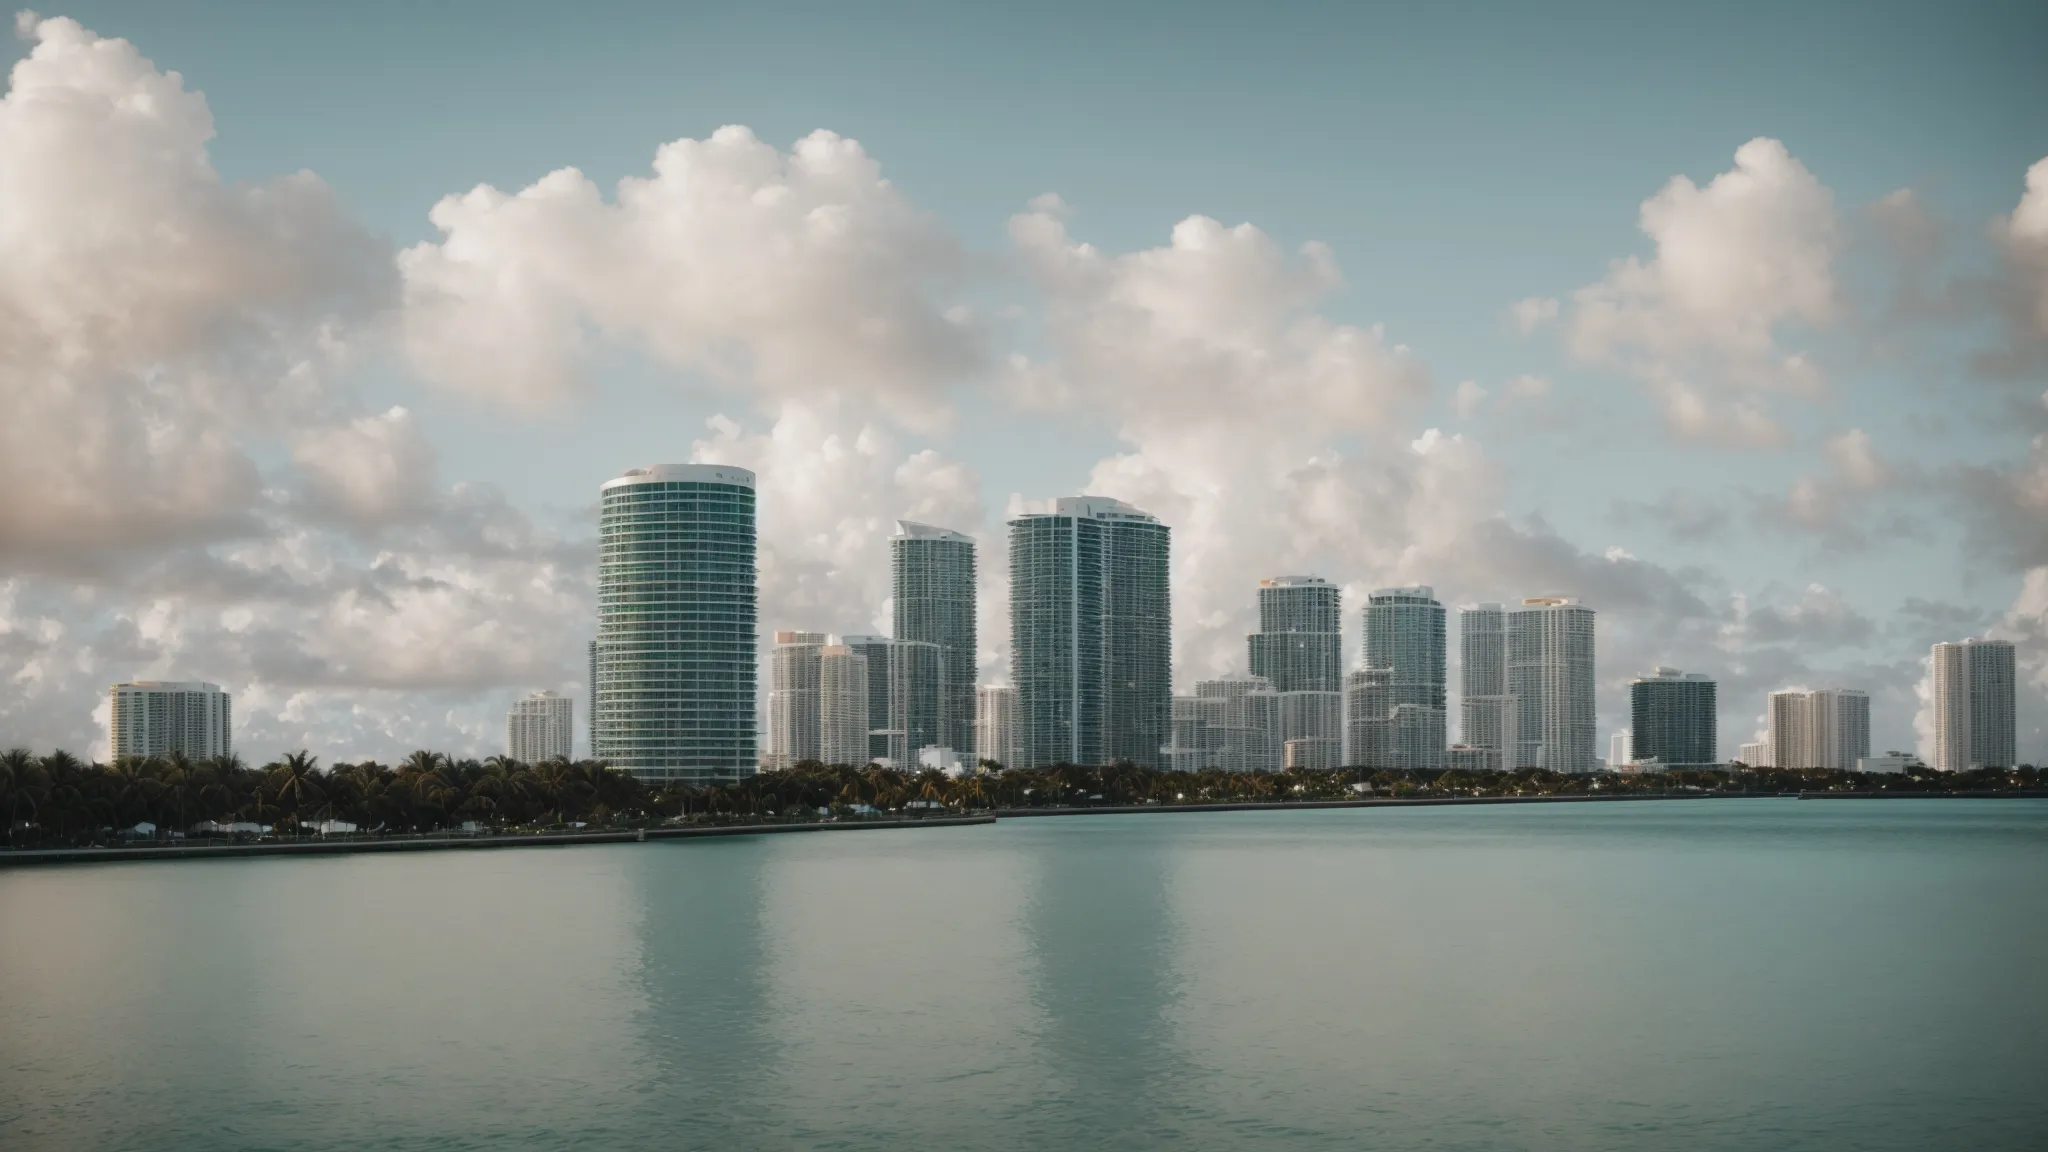 a serene image of the miami skyline reflecting the steadfast presence of a law firm within the city.